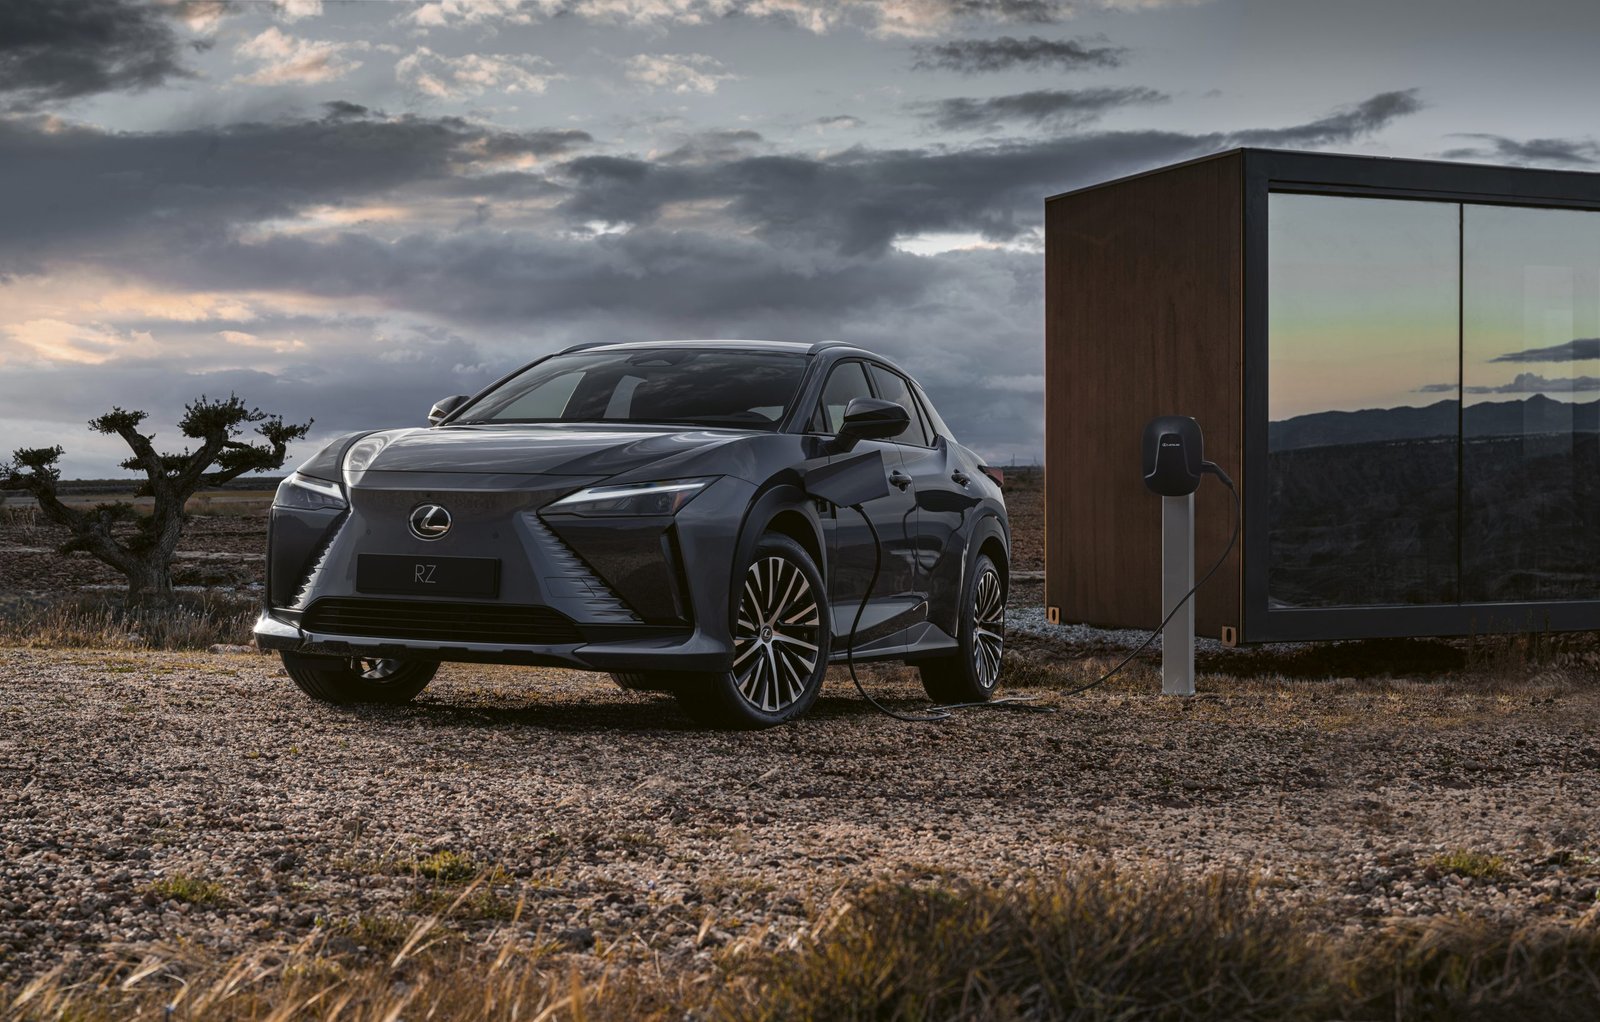 LEXUS PRESENTS THE EVOLUTION OF LUXURY AT THE 2022 LOS ANGELES AUTO SHOW WITH ALL-NEW RX AND RZ